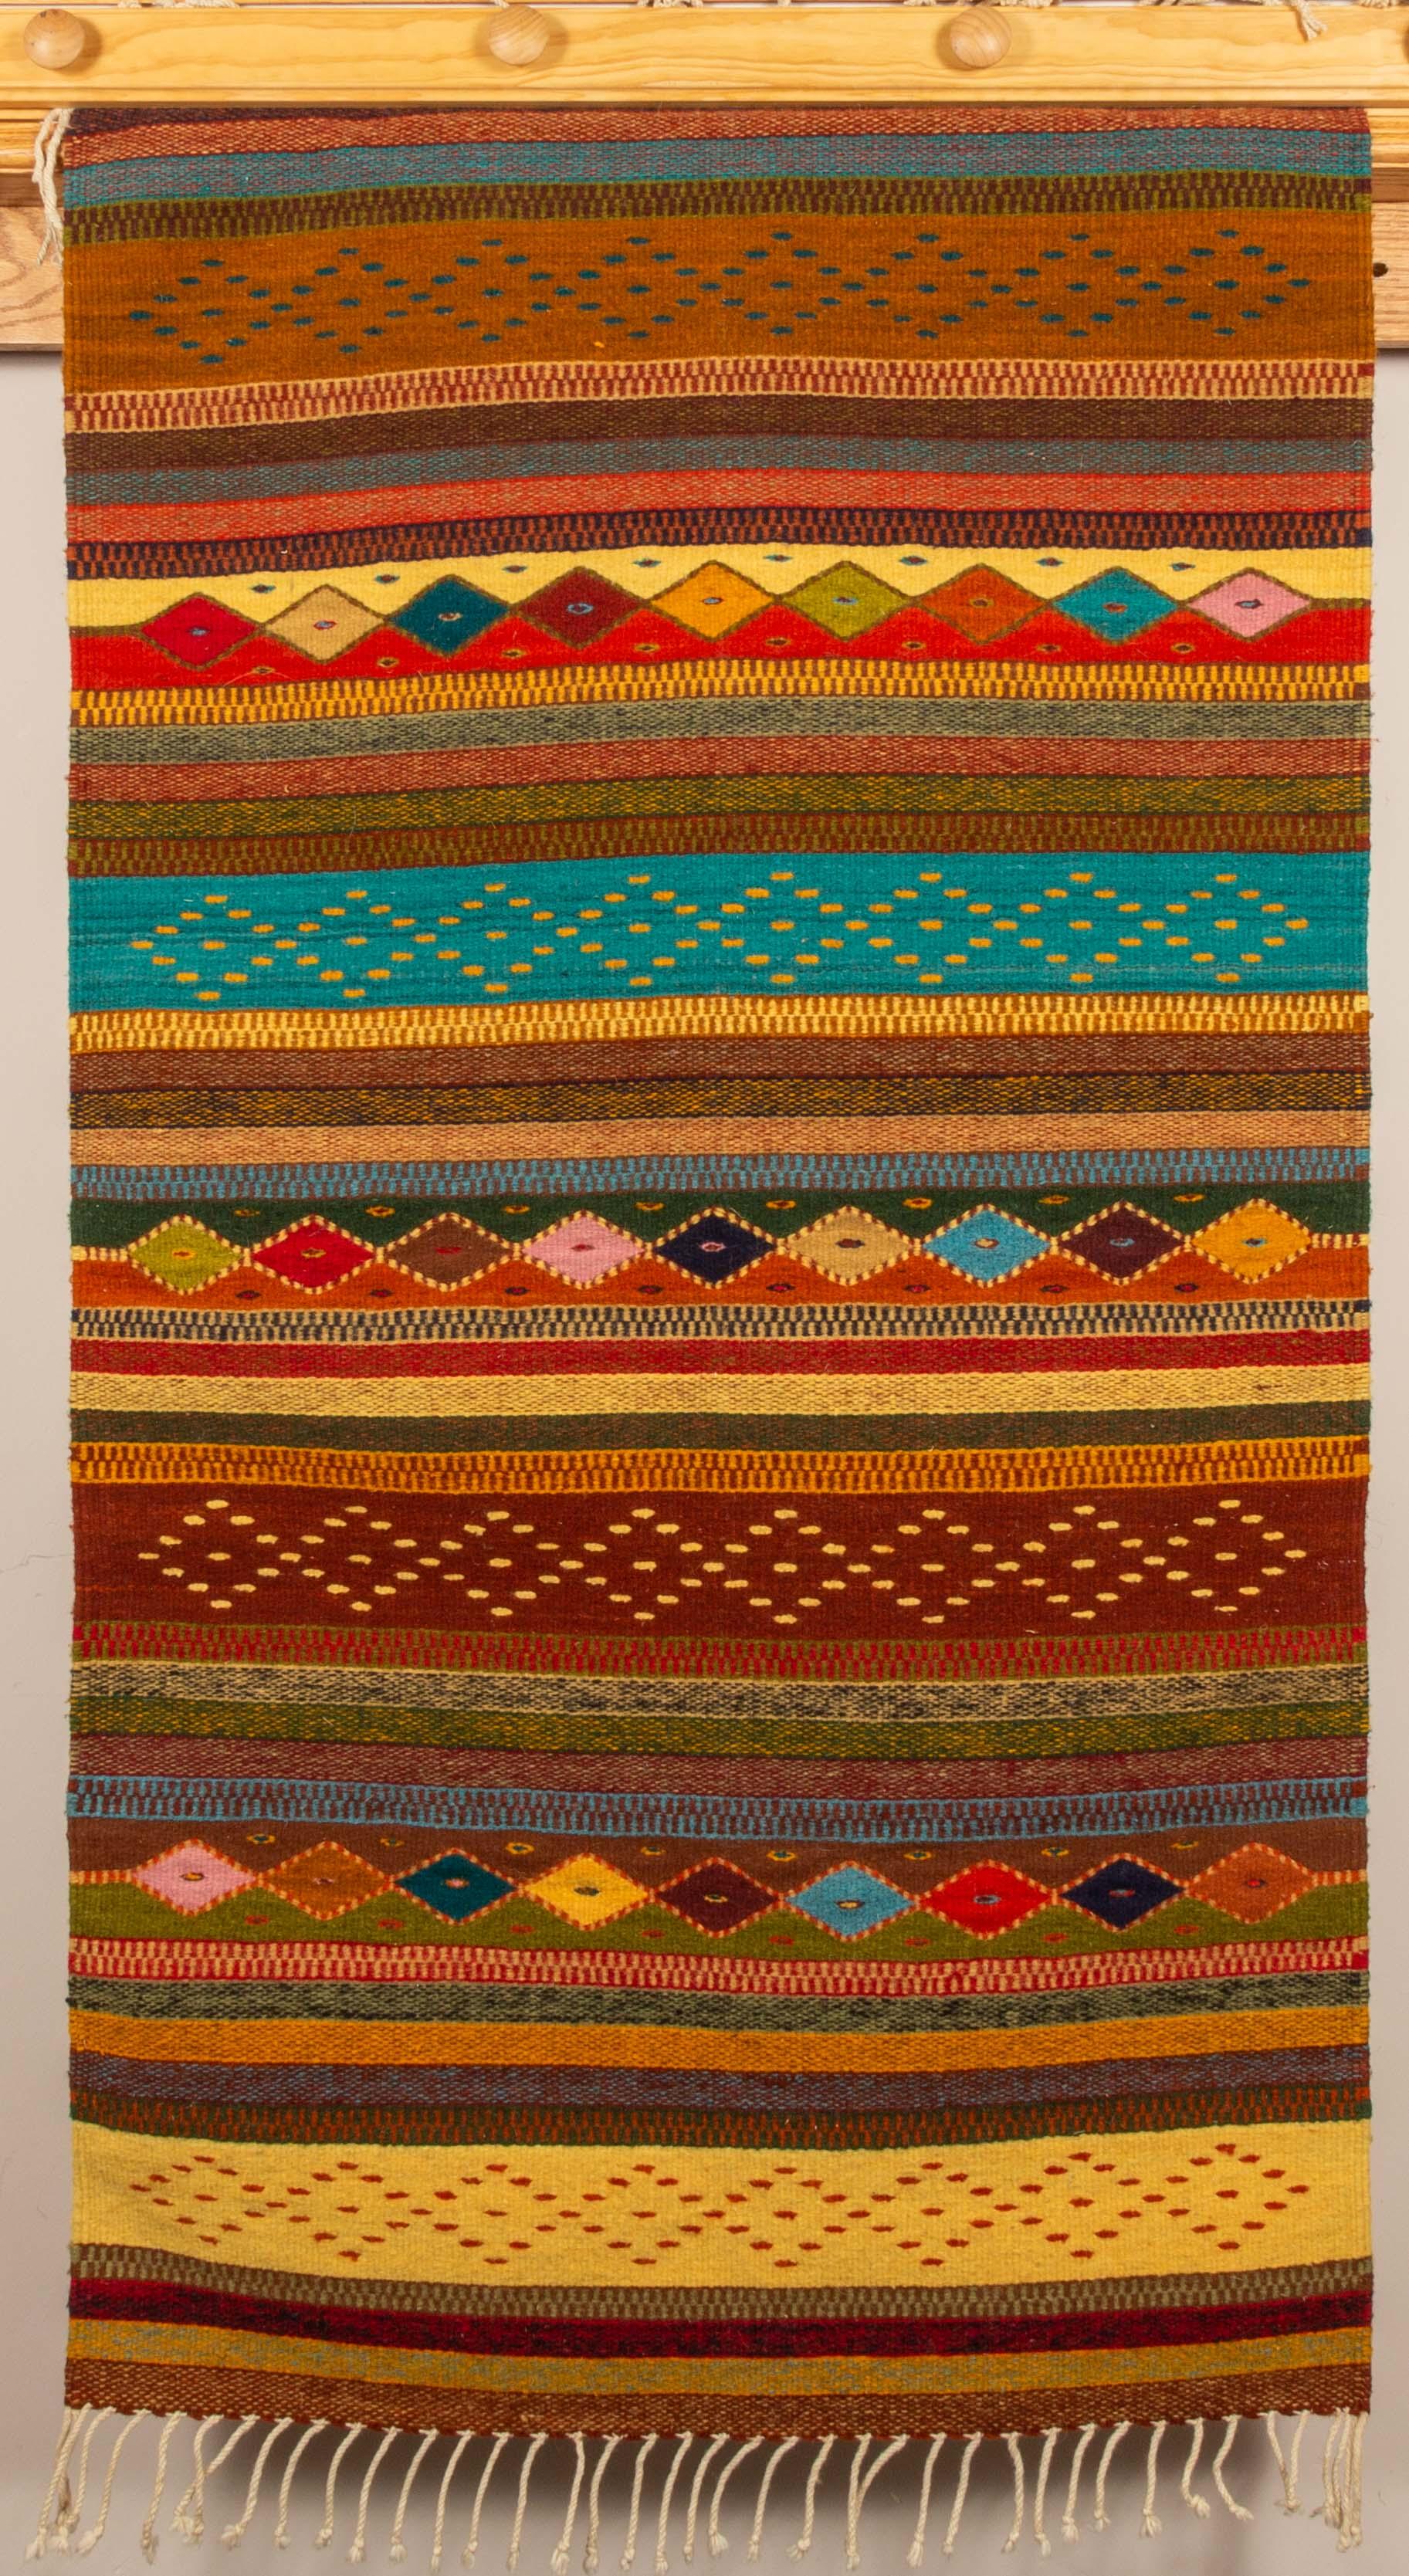 Rain and Mountains, Handwoven Zapotec Wool Rug with hanger, Oaxaca, Mexico - Mixed Media Art by Javier Vicente